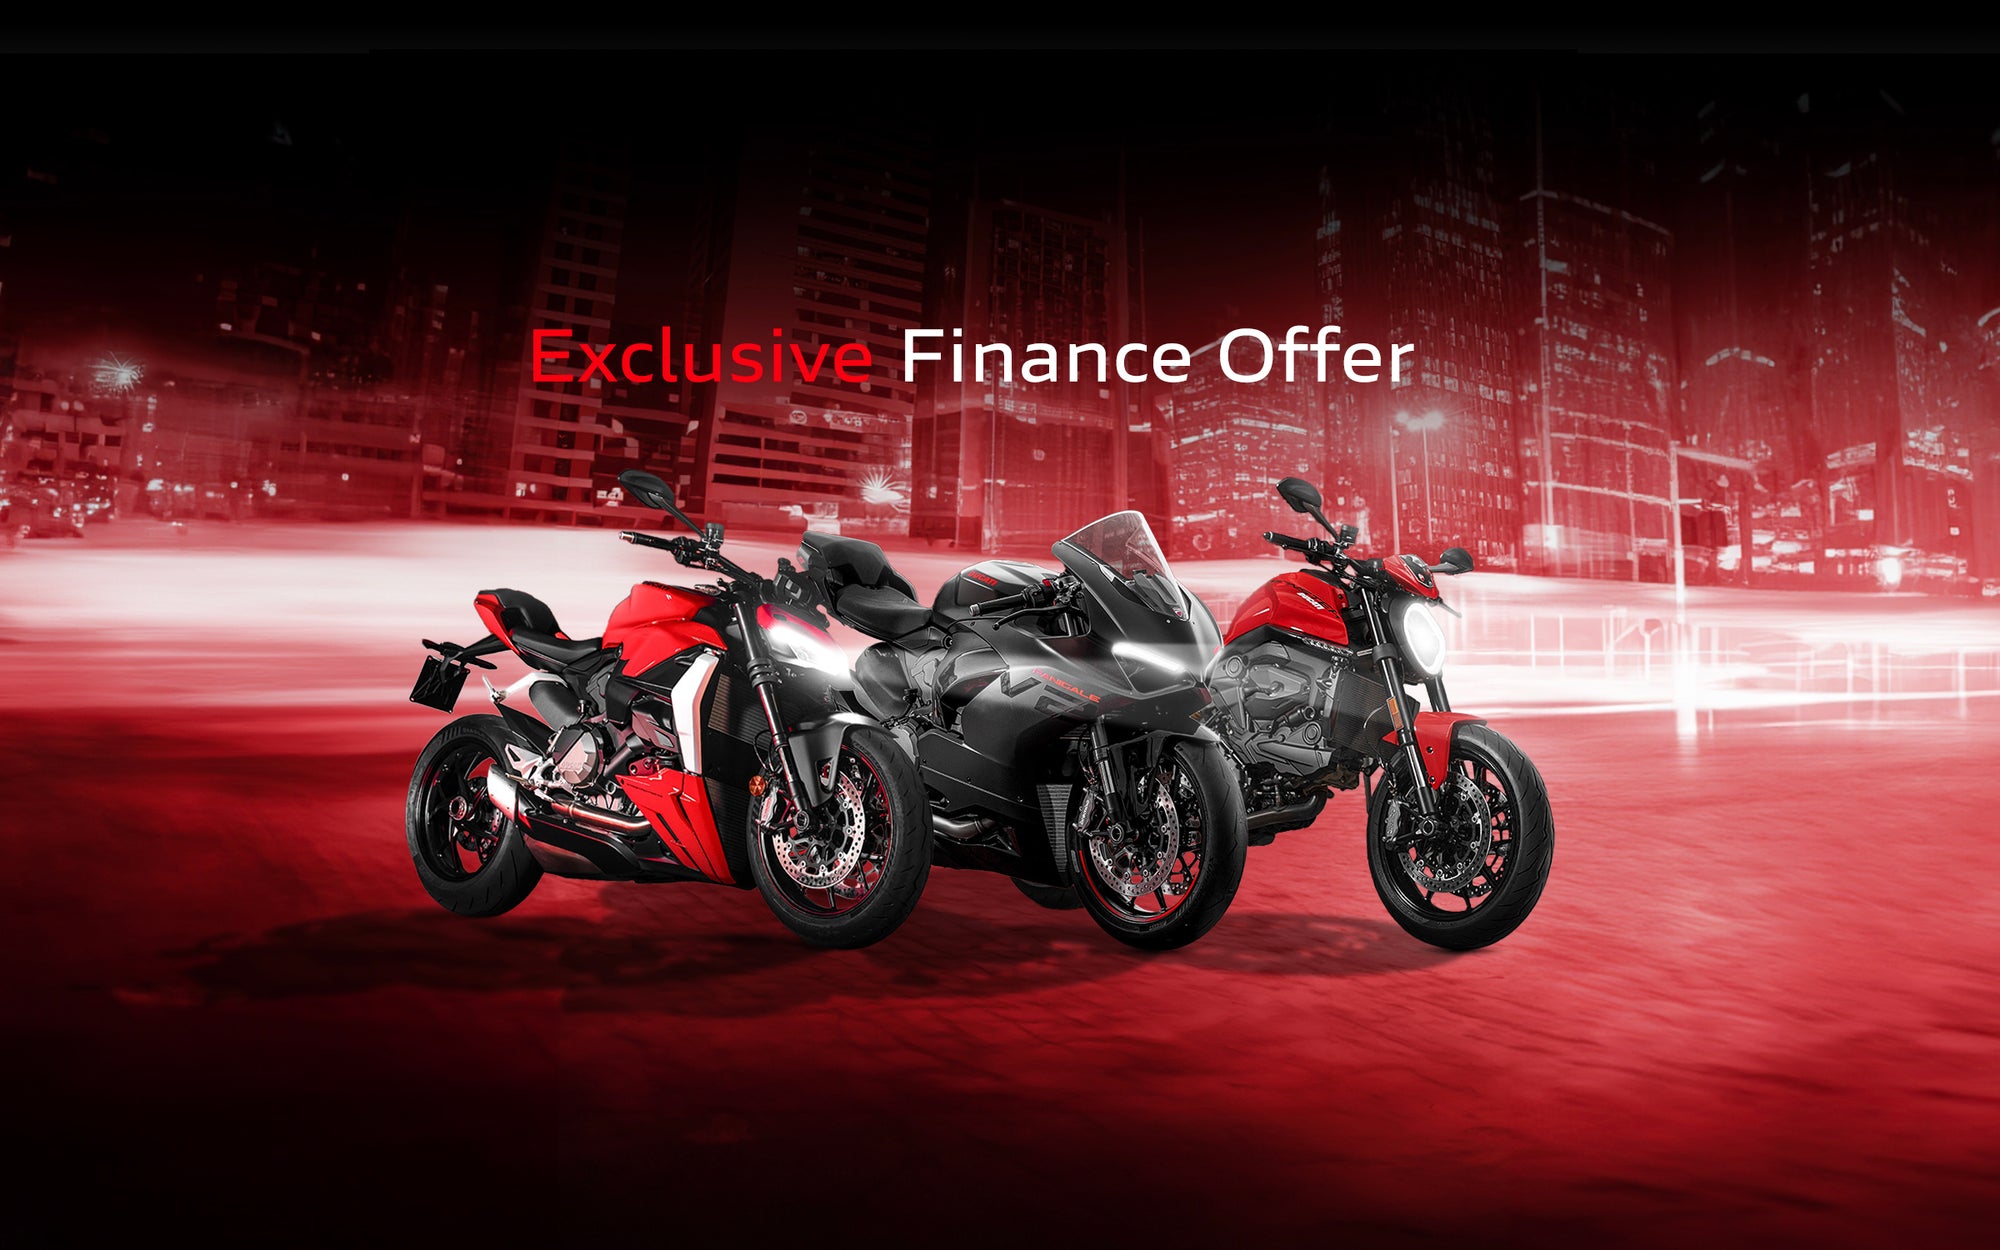 Ducati - Exclusive Finance Offer